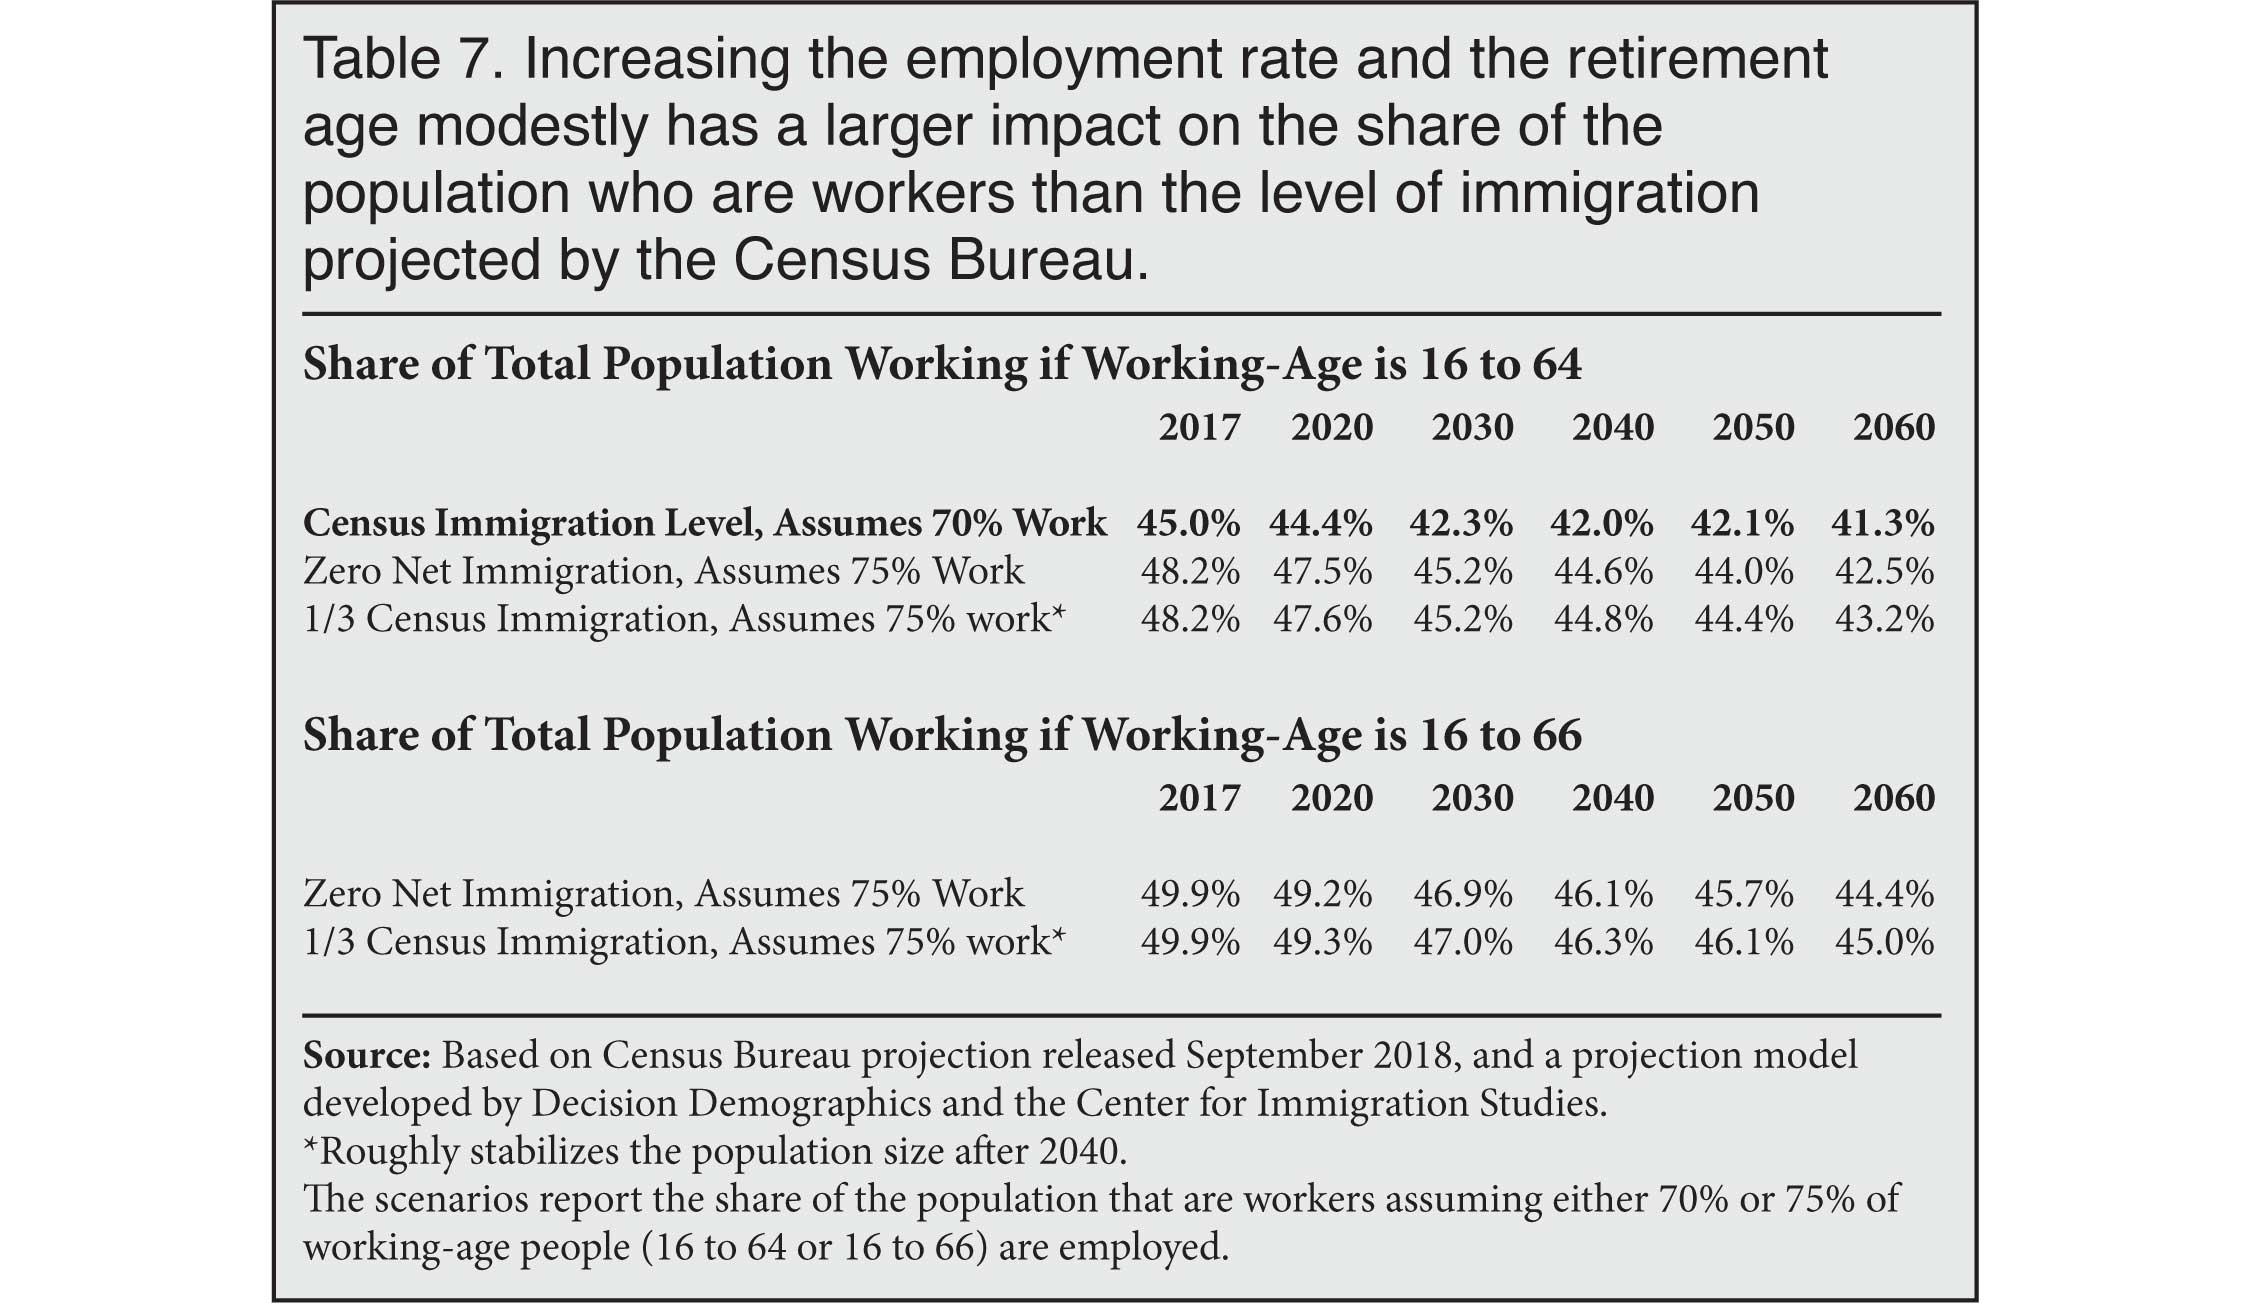 Table: Increasing the Employment Rate and the Retirement Age Modestly has a Larger Impact on the Share of the Population Who are Workers than the Level of Immigration Projected by the Census Bureau